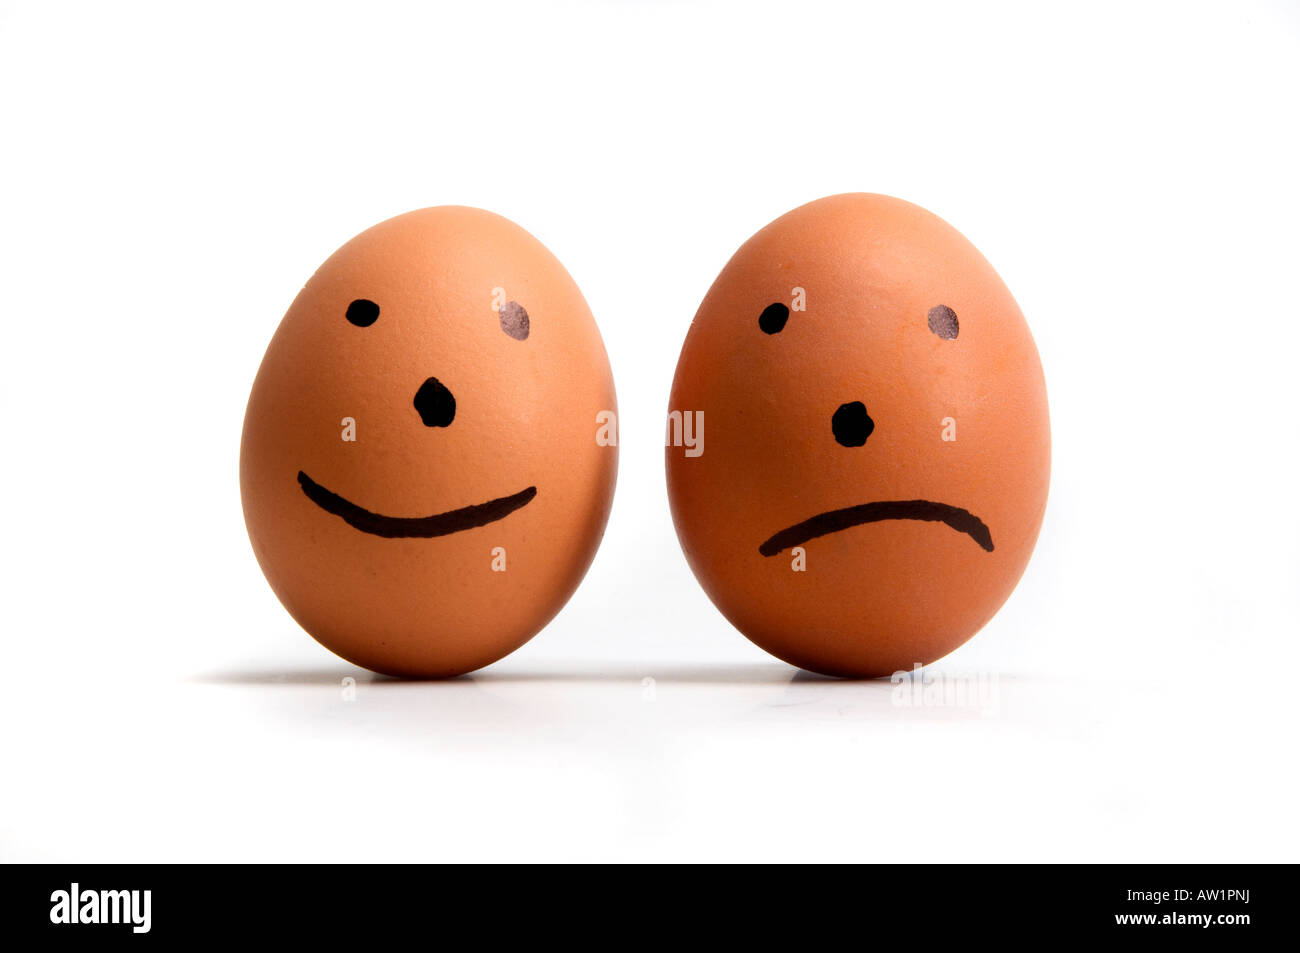 Image showing two eggs with happy and sad face on them. Stock Photo